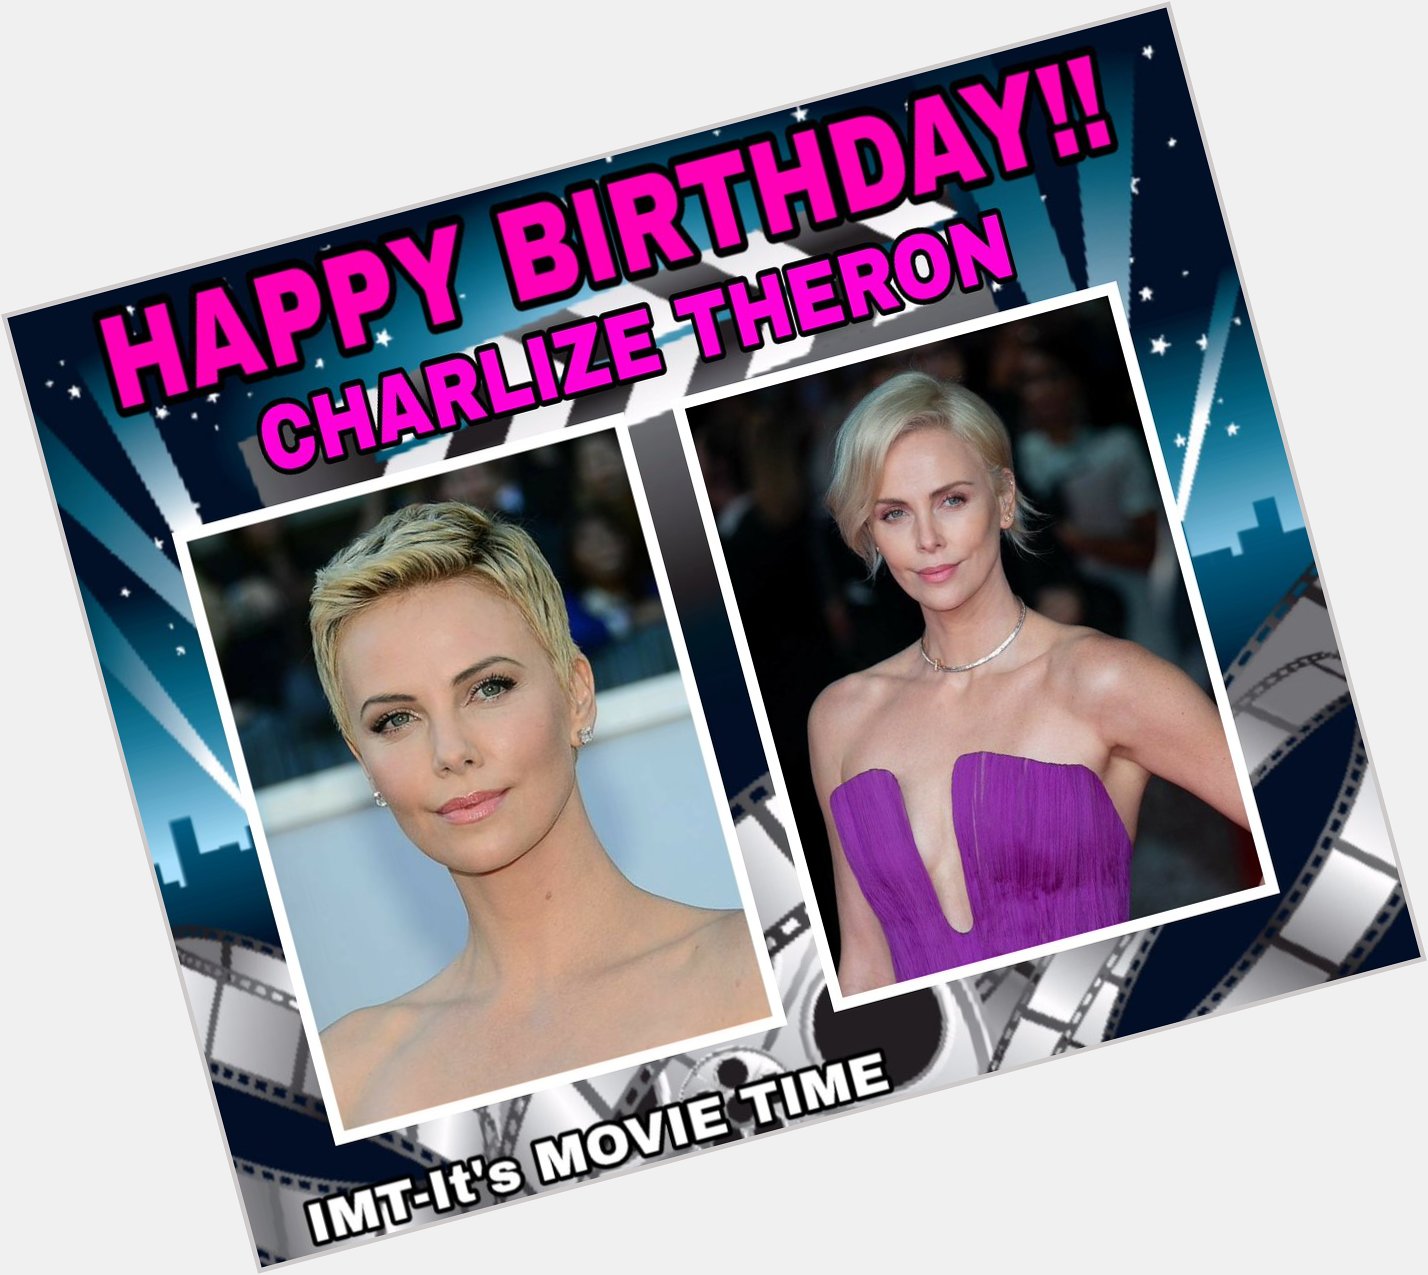 Happy Birthday to the Beautiful Charlize Theron! She is celebrating 45 years. 